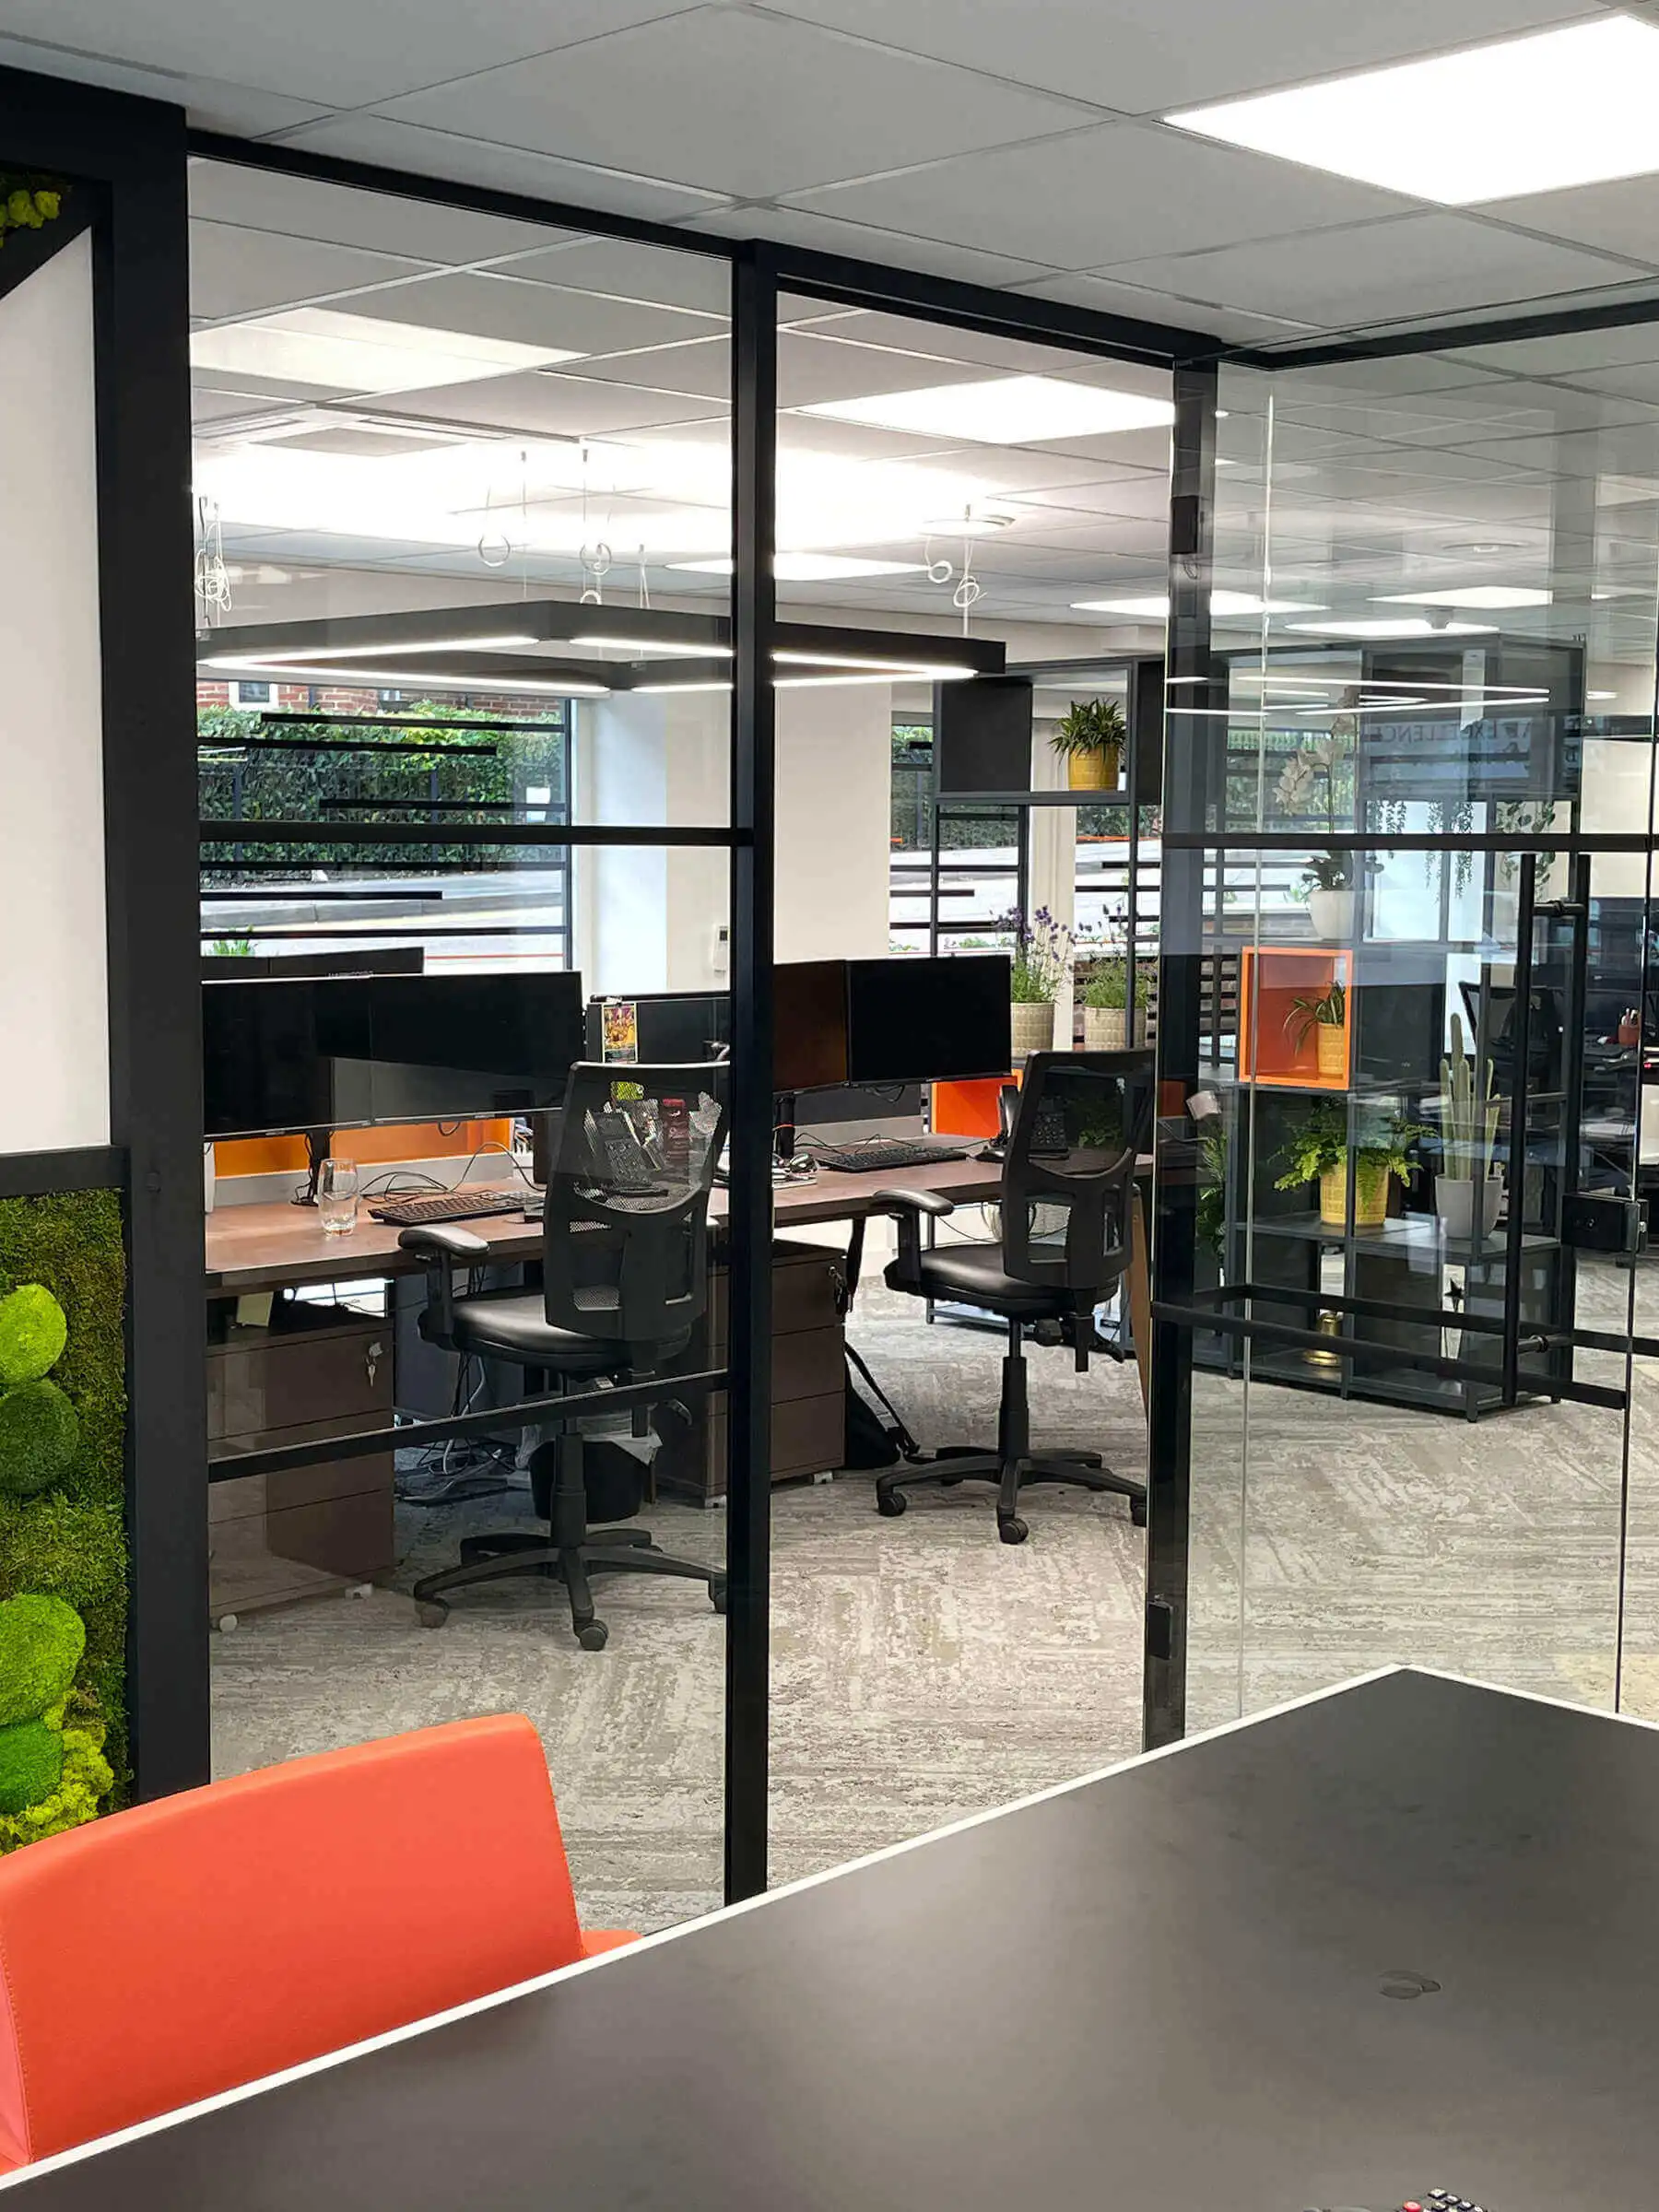 Meeting and co work space seperated with black framed glass partitions